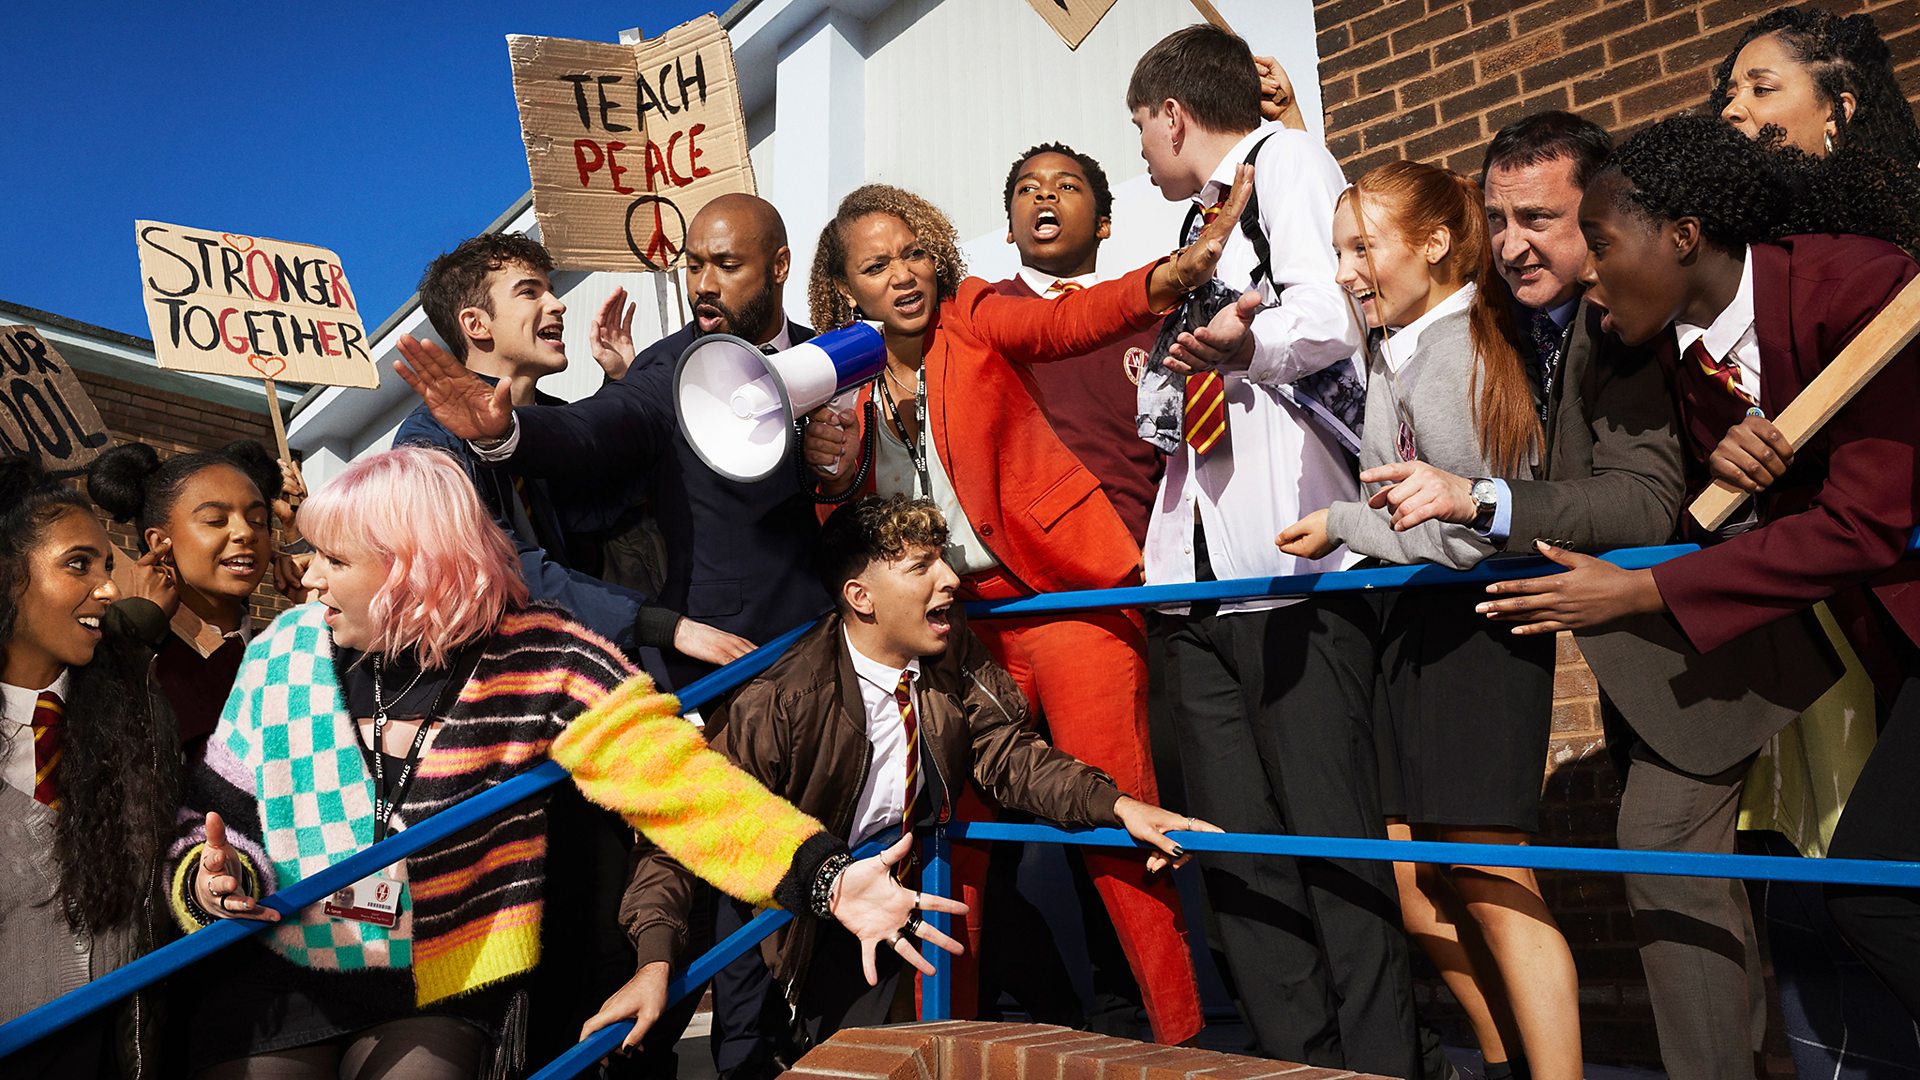 Waterloo Road Teases First Look Image As Series Is Confirmed To Return To The BBC In January